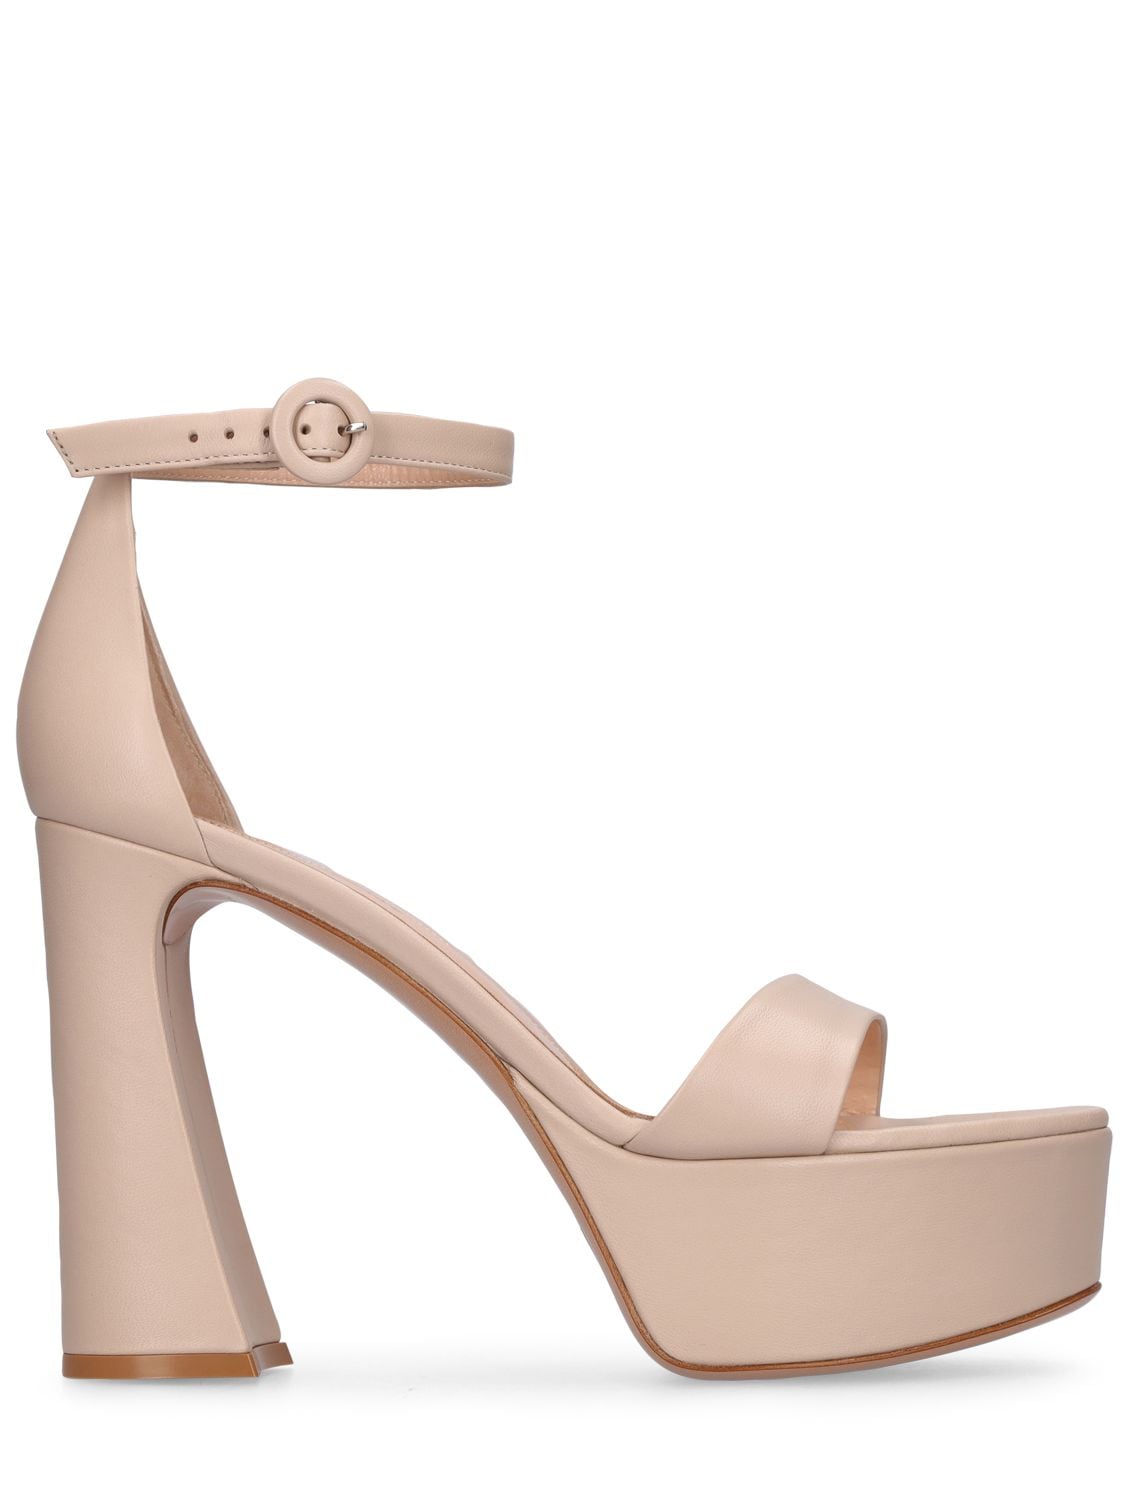 Gianvito Rossi 105mm Holly Leather High Heel Sandals In Nude